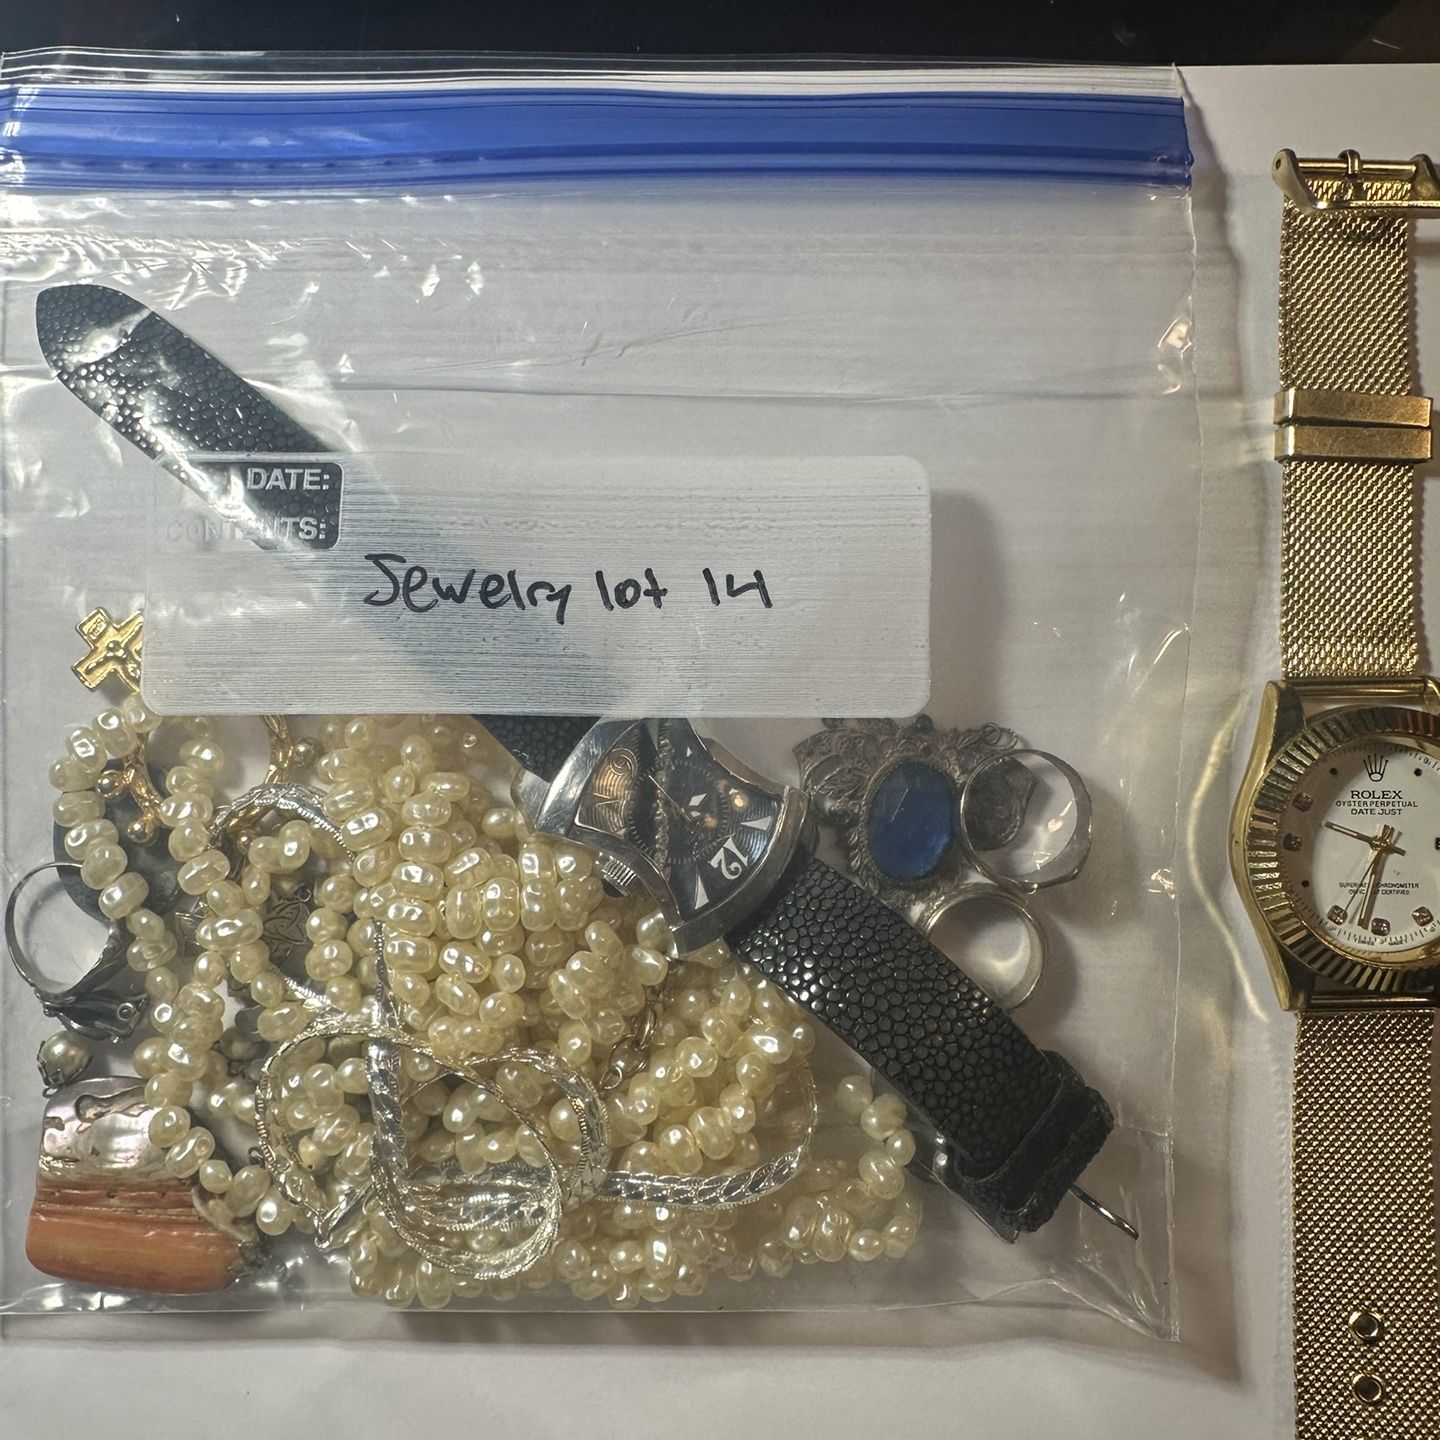 Assorted Jewelry Lot - Watch, Rings, Pearls, Necklaces